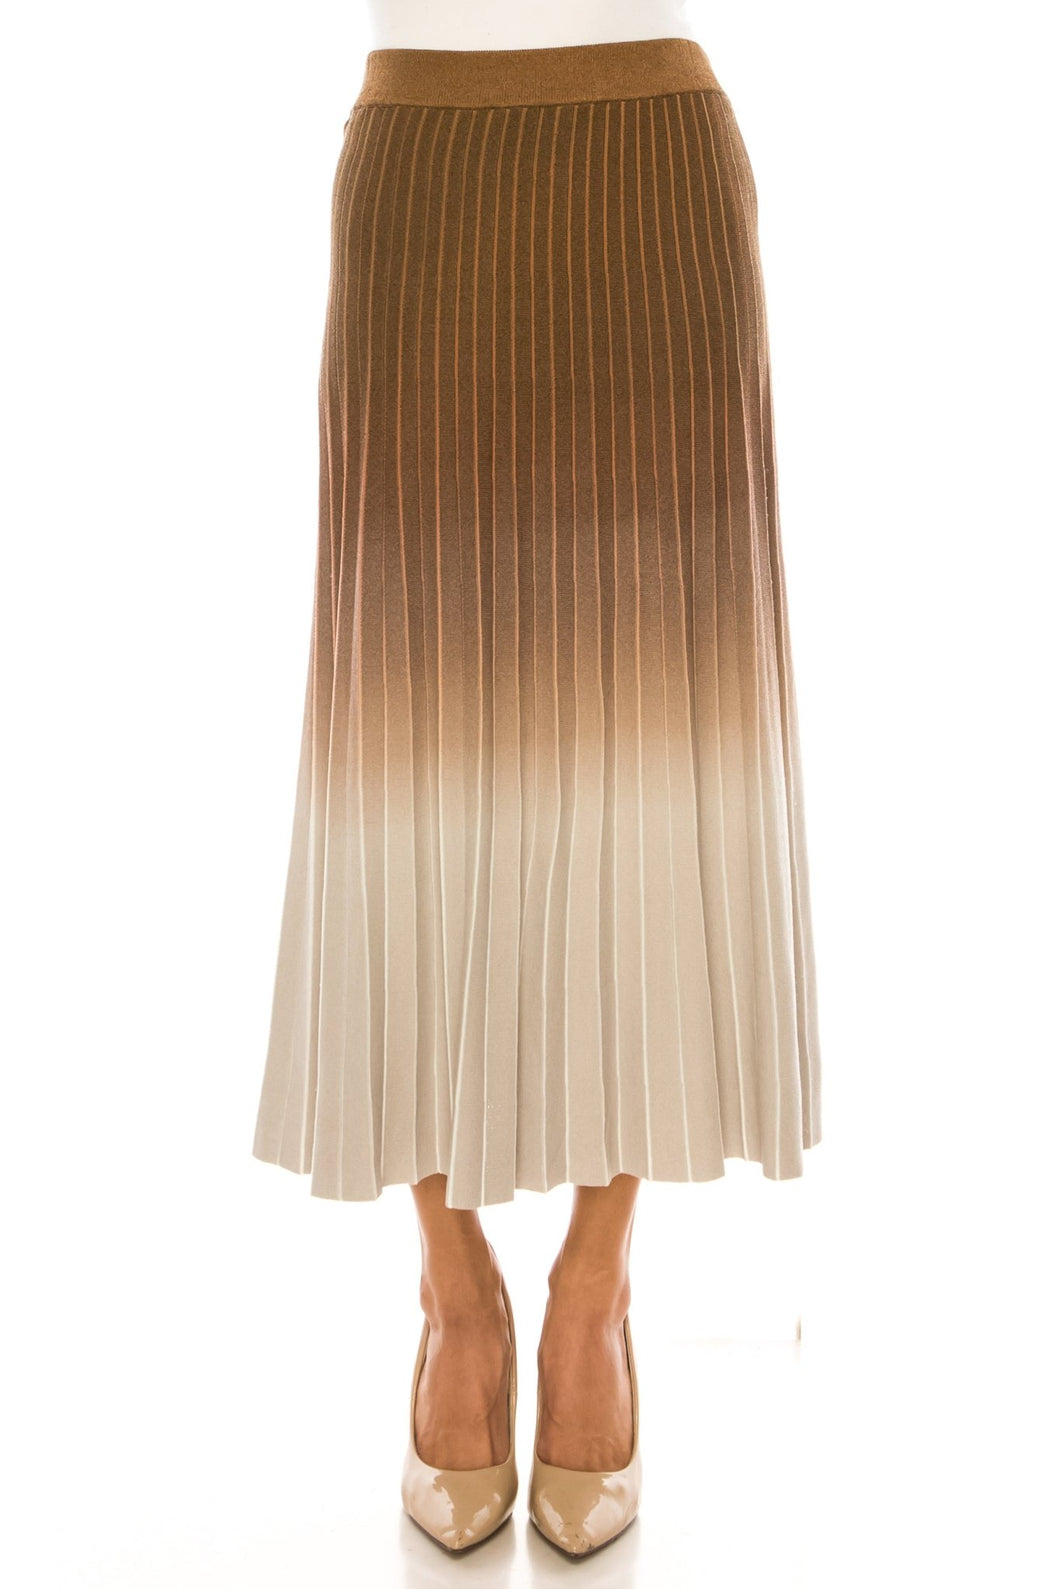 YAL OMBRE KNIT PLEATED SKIRT - Skirts